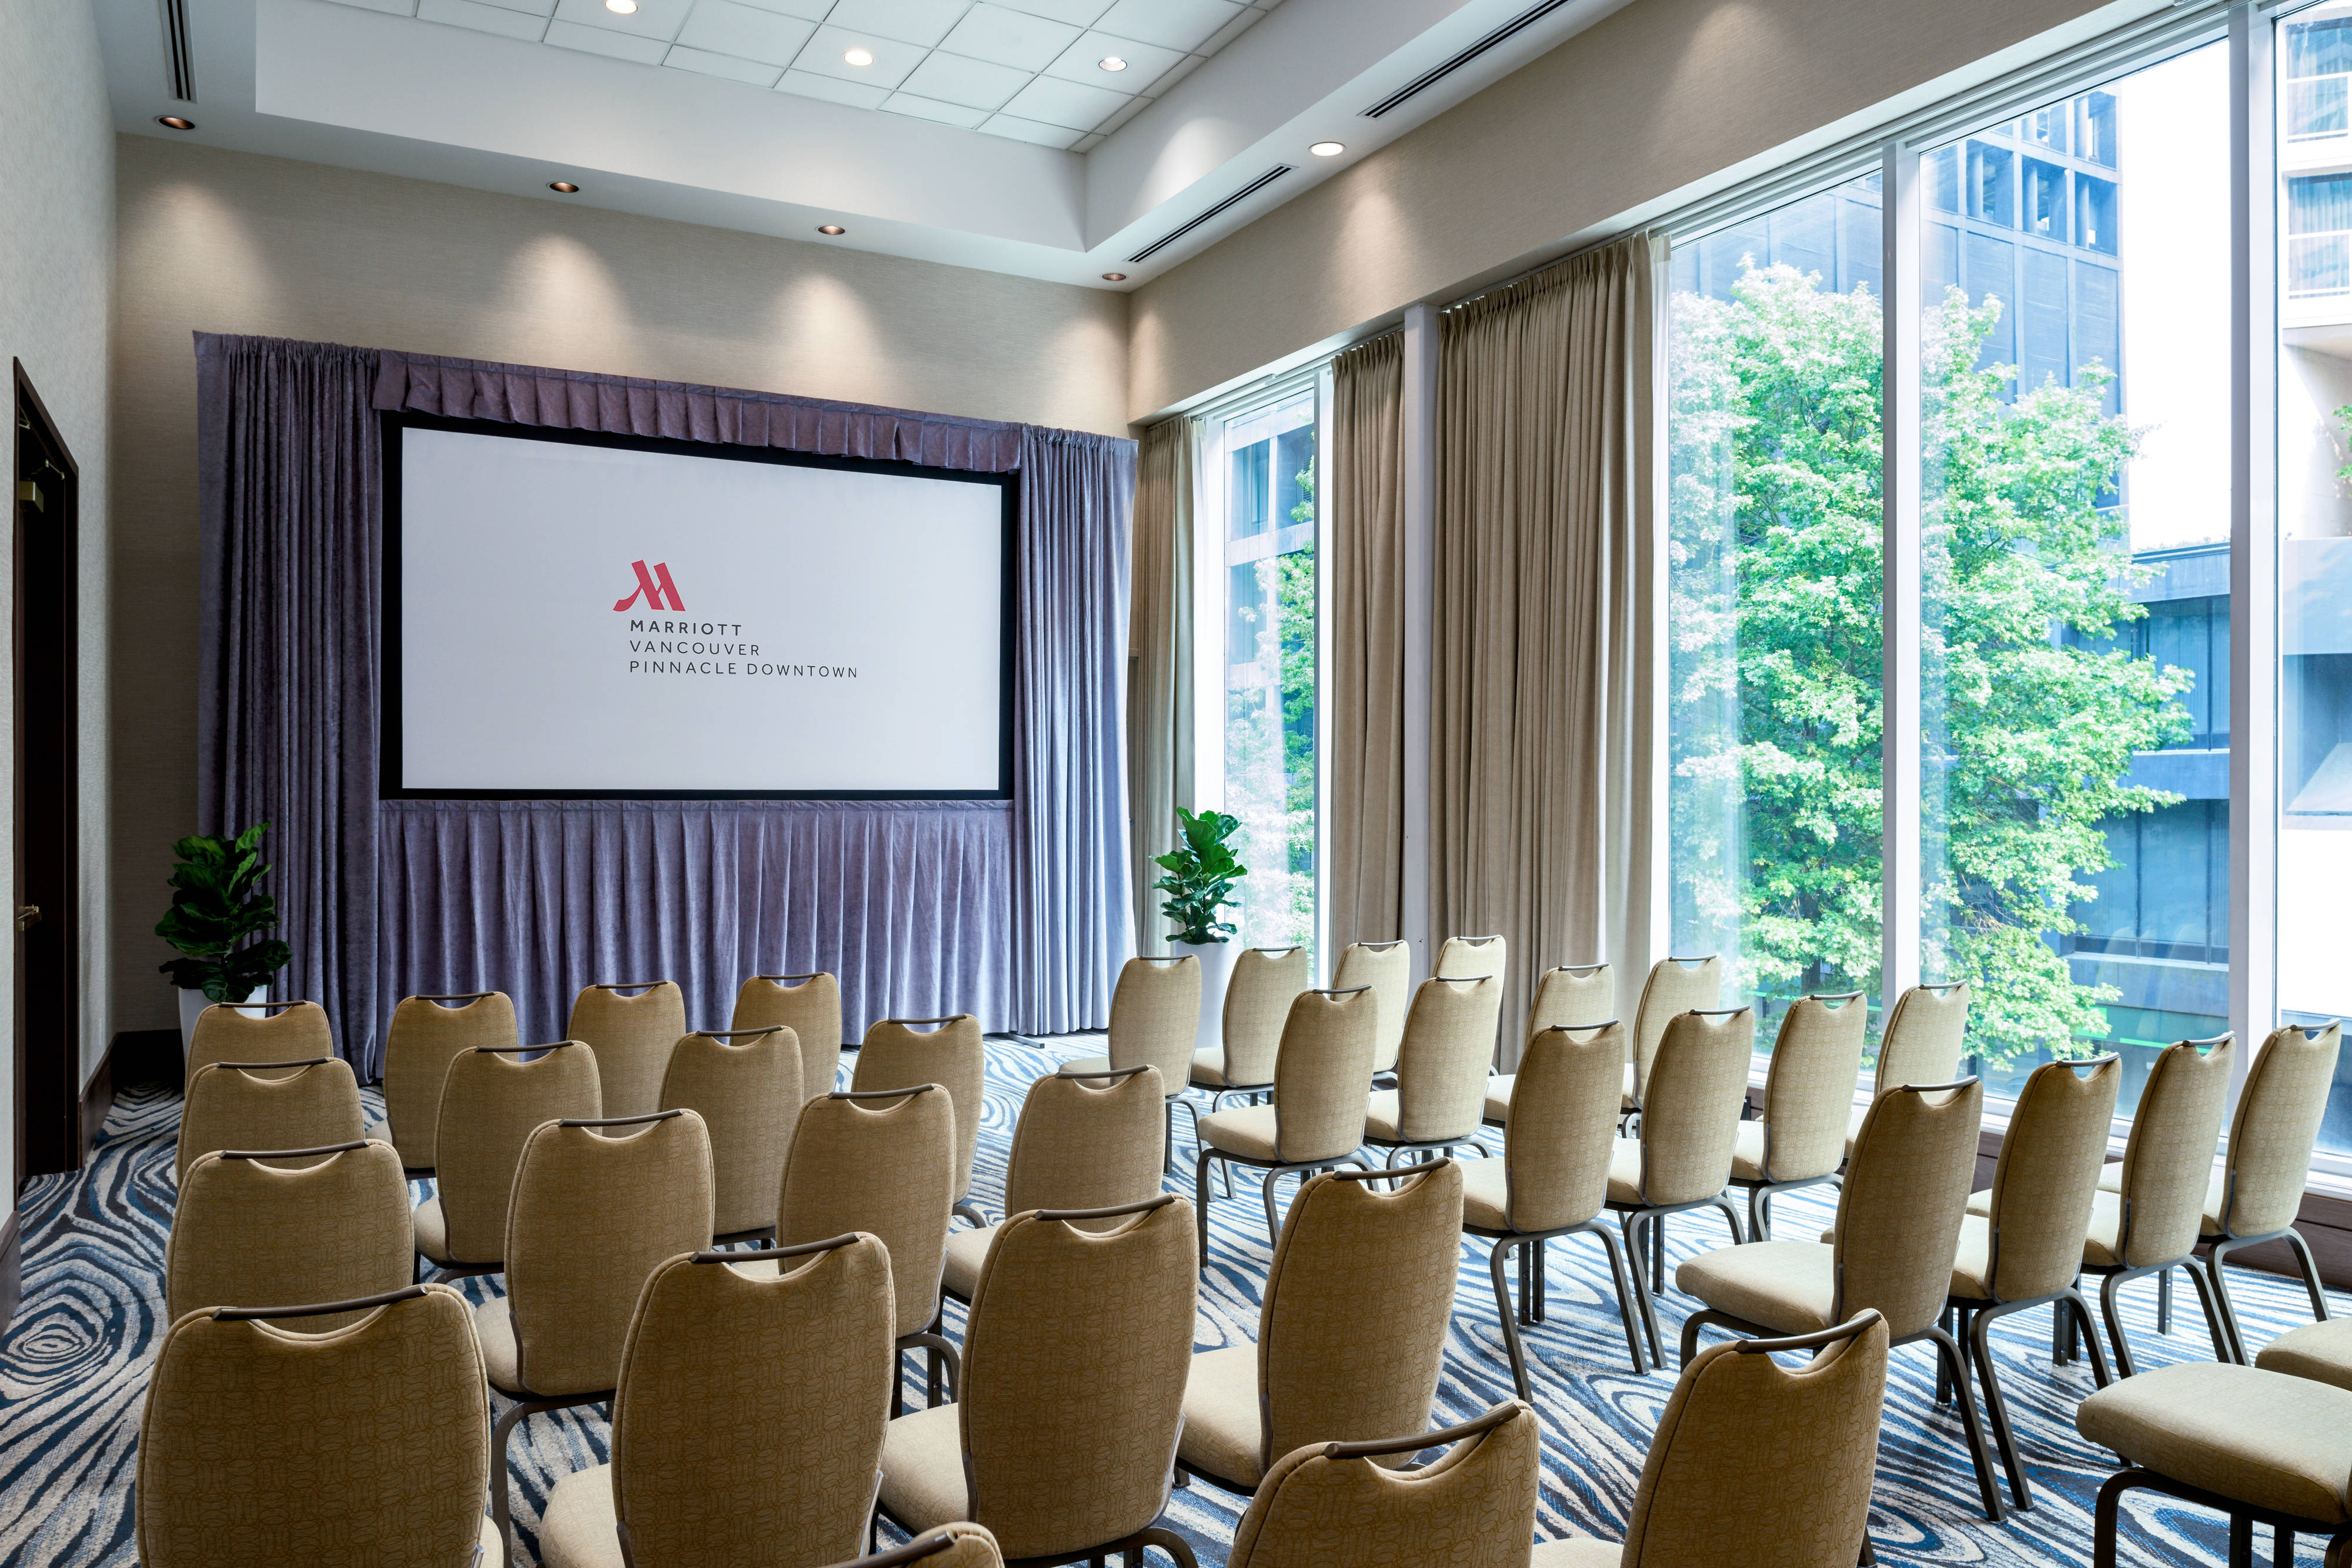 Chairs arranged in rows before a projector screen next to large windows.